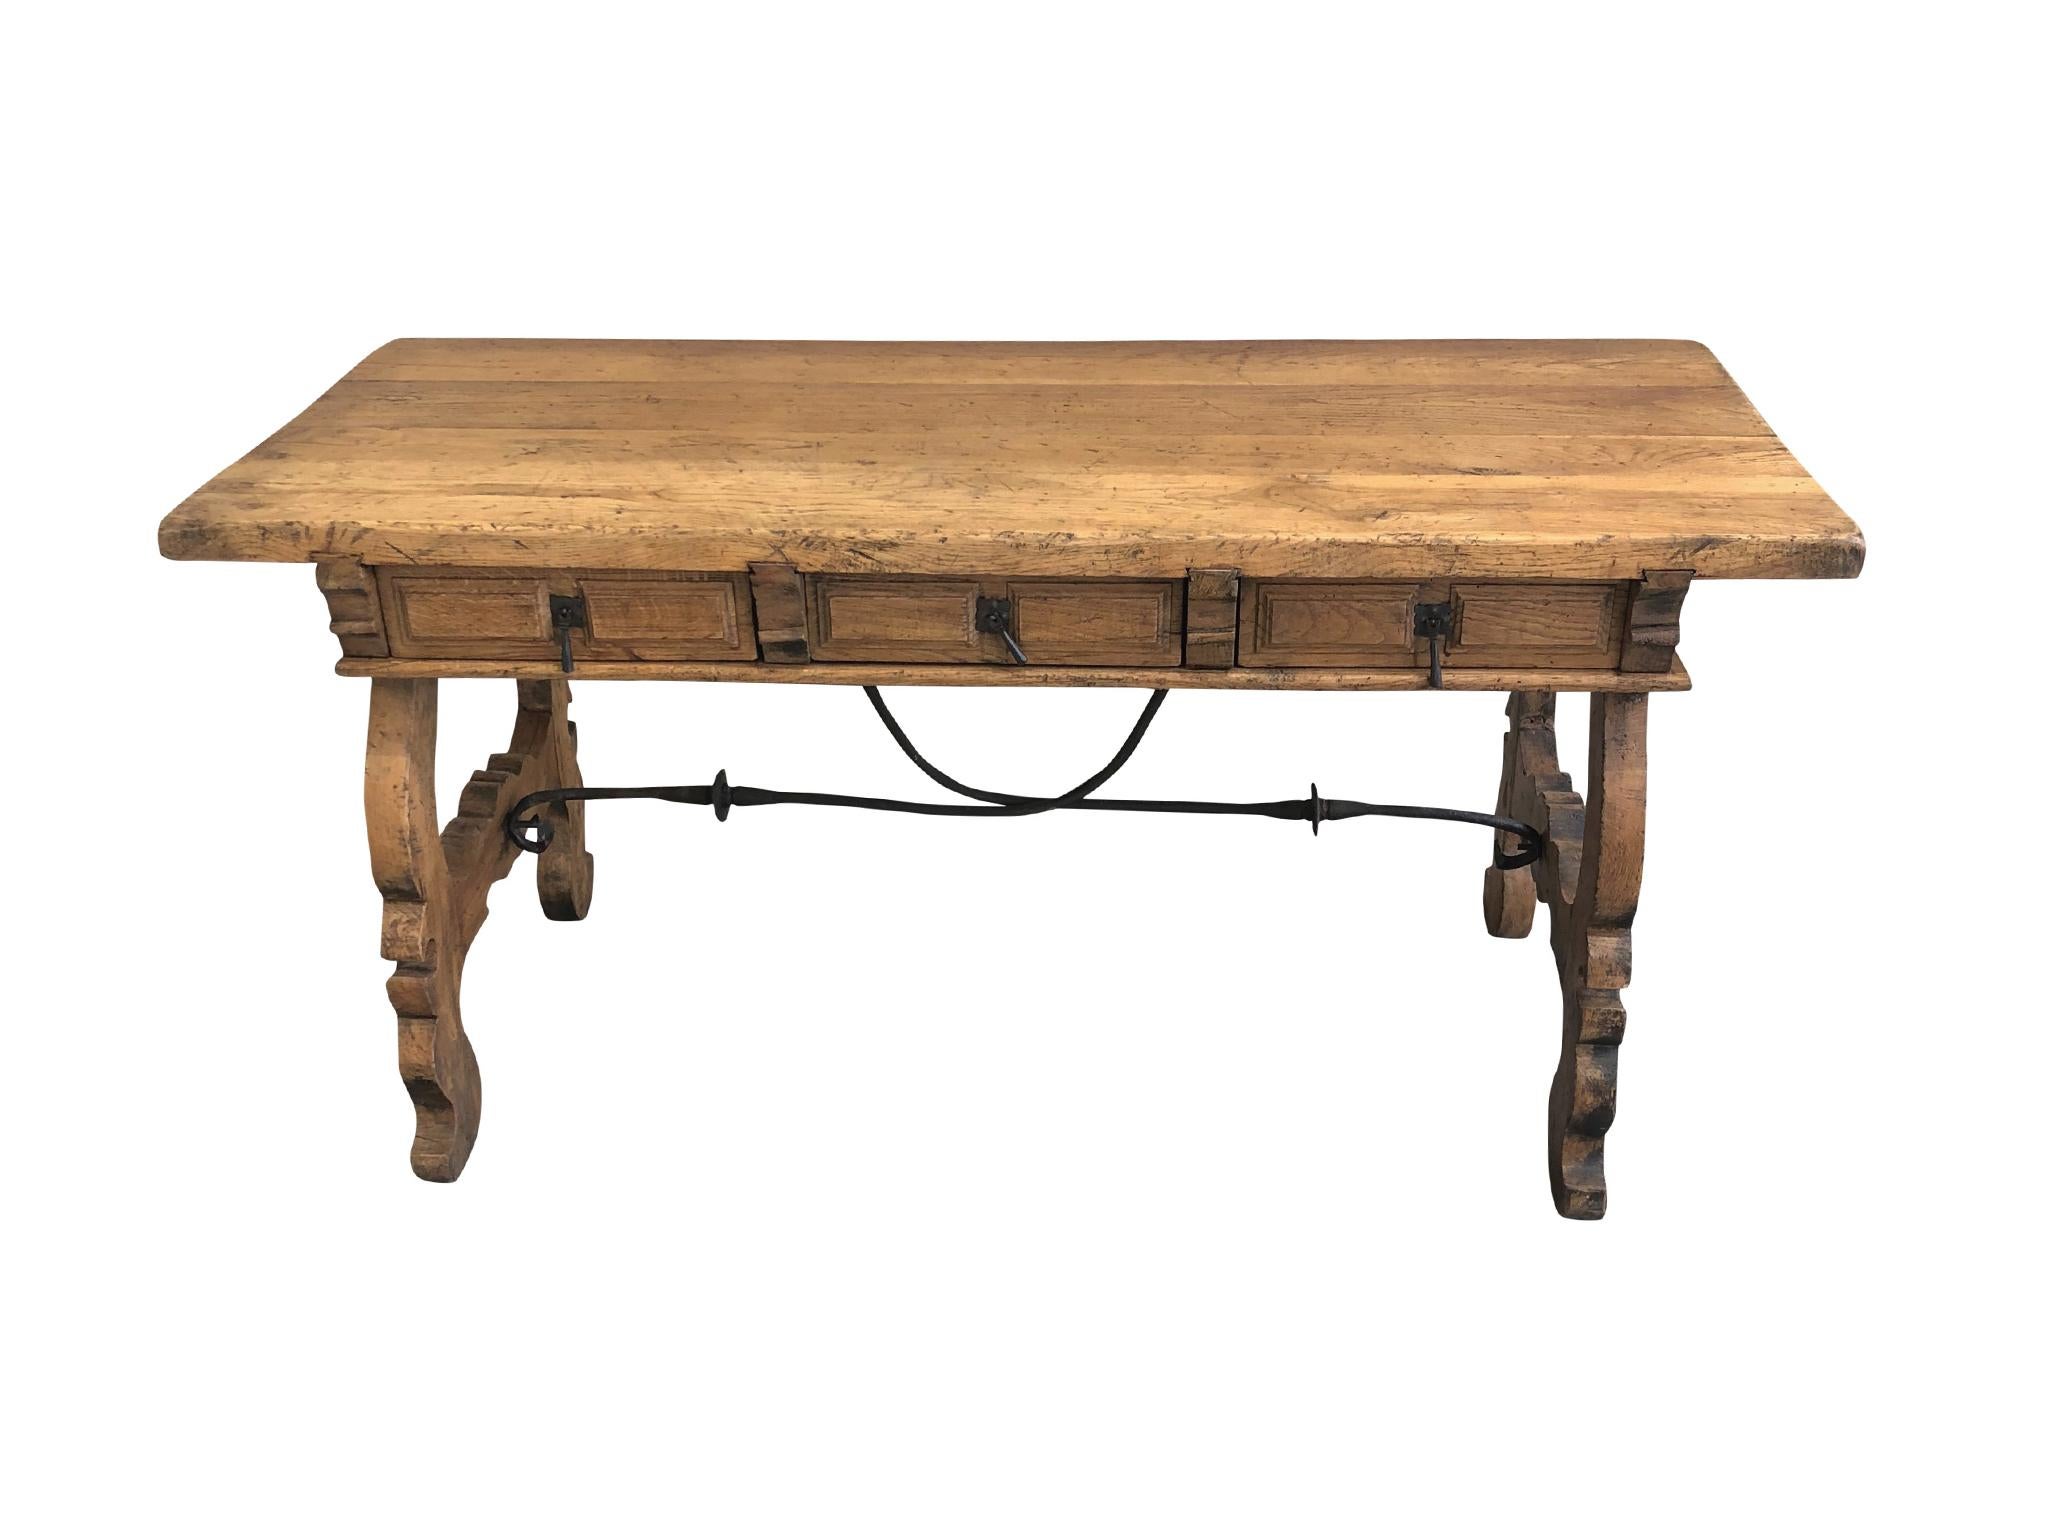 An antique desk handcrafted in a Spanish Colonial style. Made in the 19th century. The desk consists of carved and hand-joined oak wood. There are three drawers with iron pulls. A wrought iron bar supports the trestle legs. The beautifully aged and